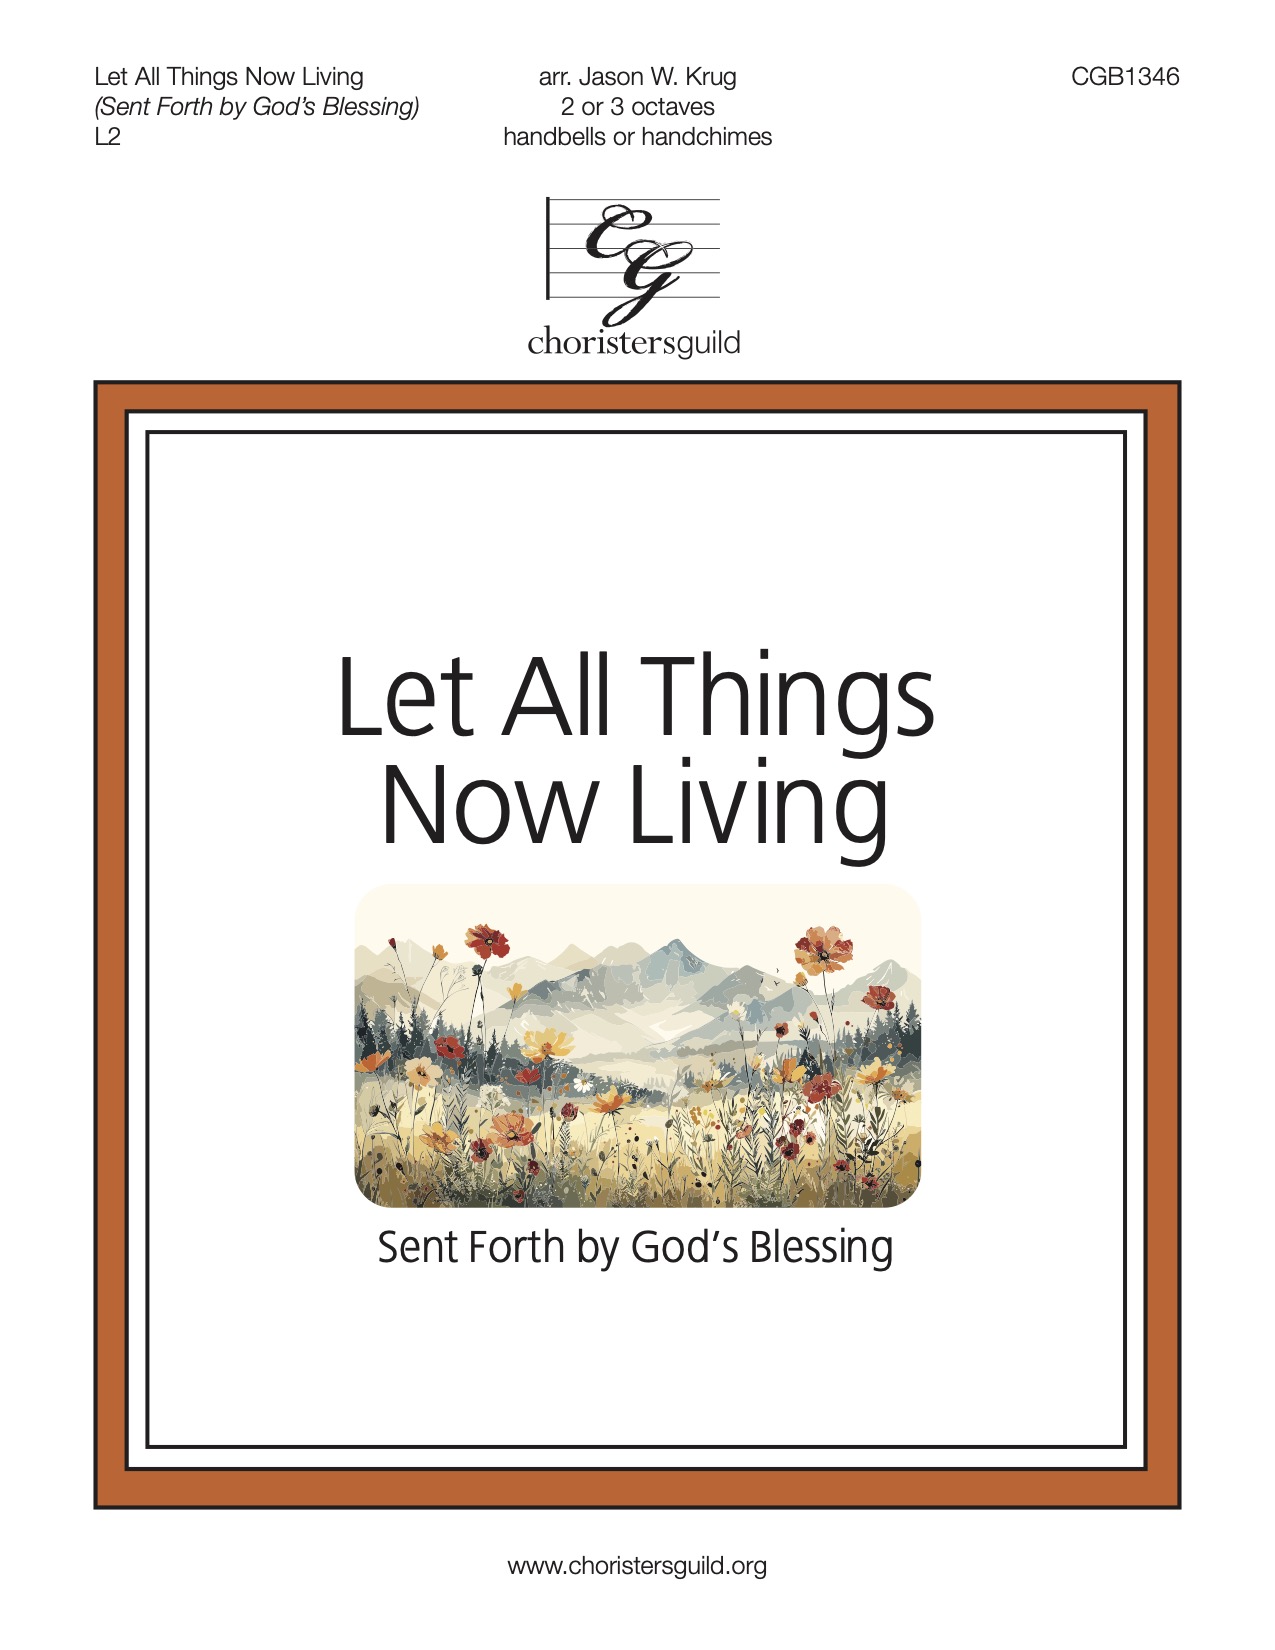 Let All Things Now Living (2-3 octaves)